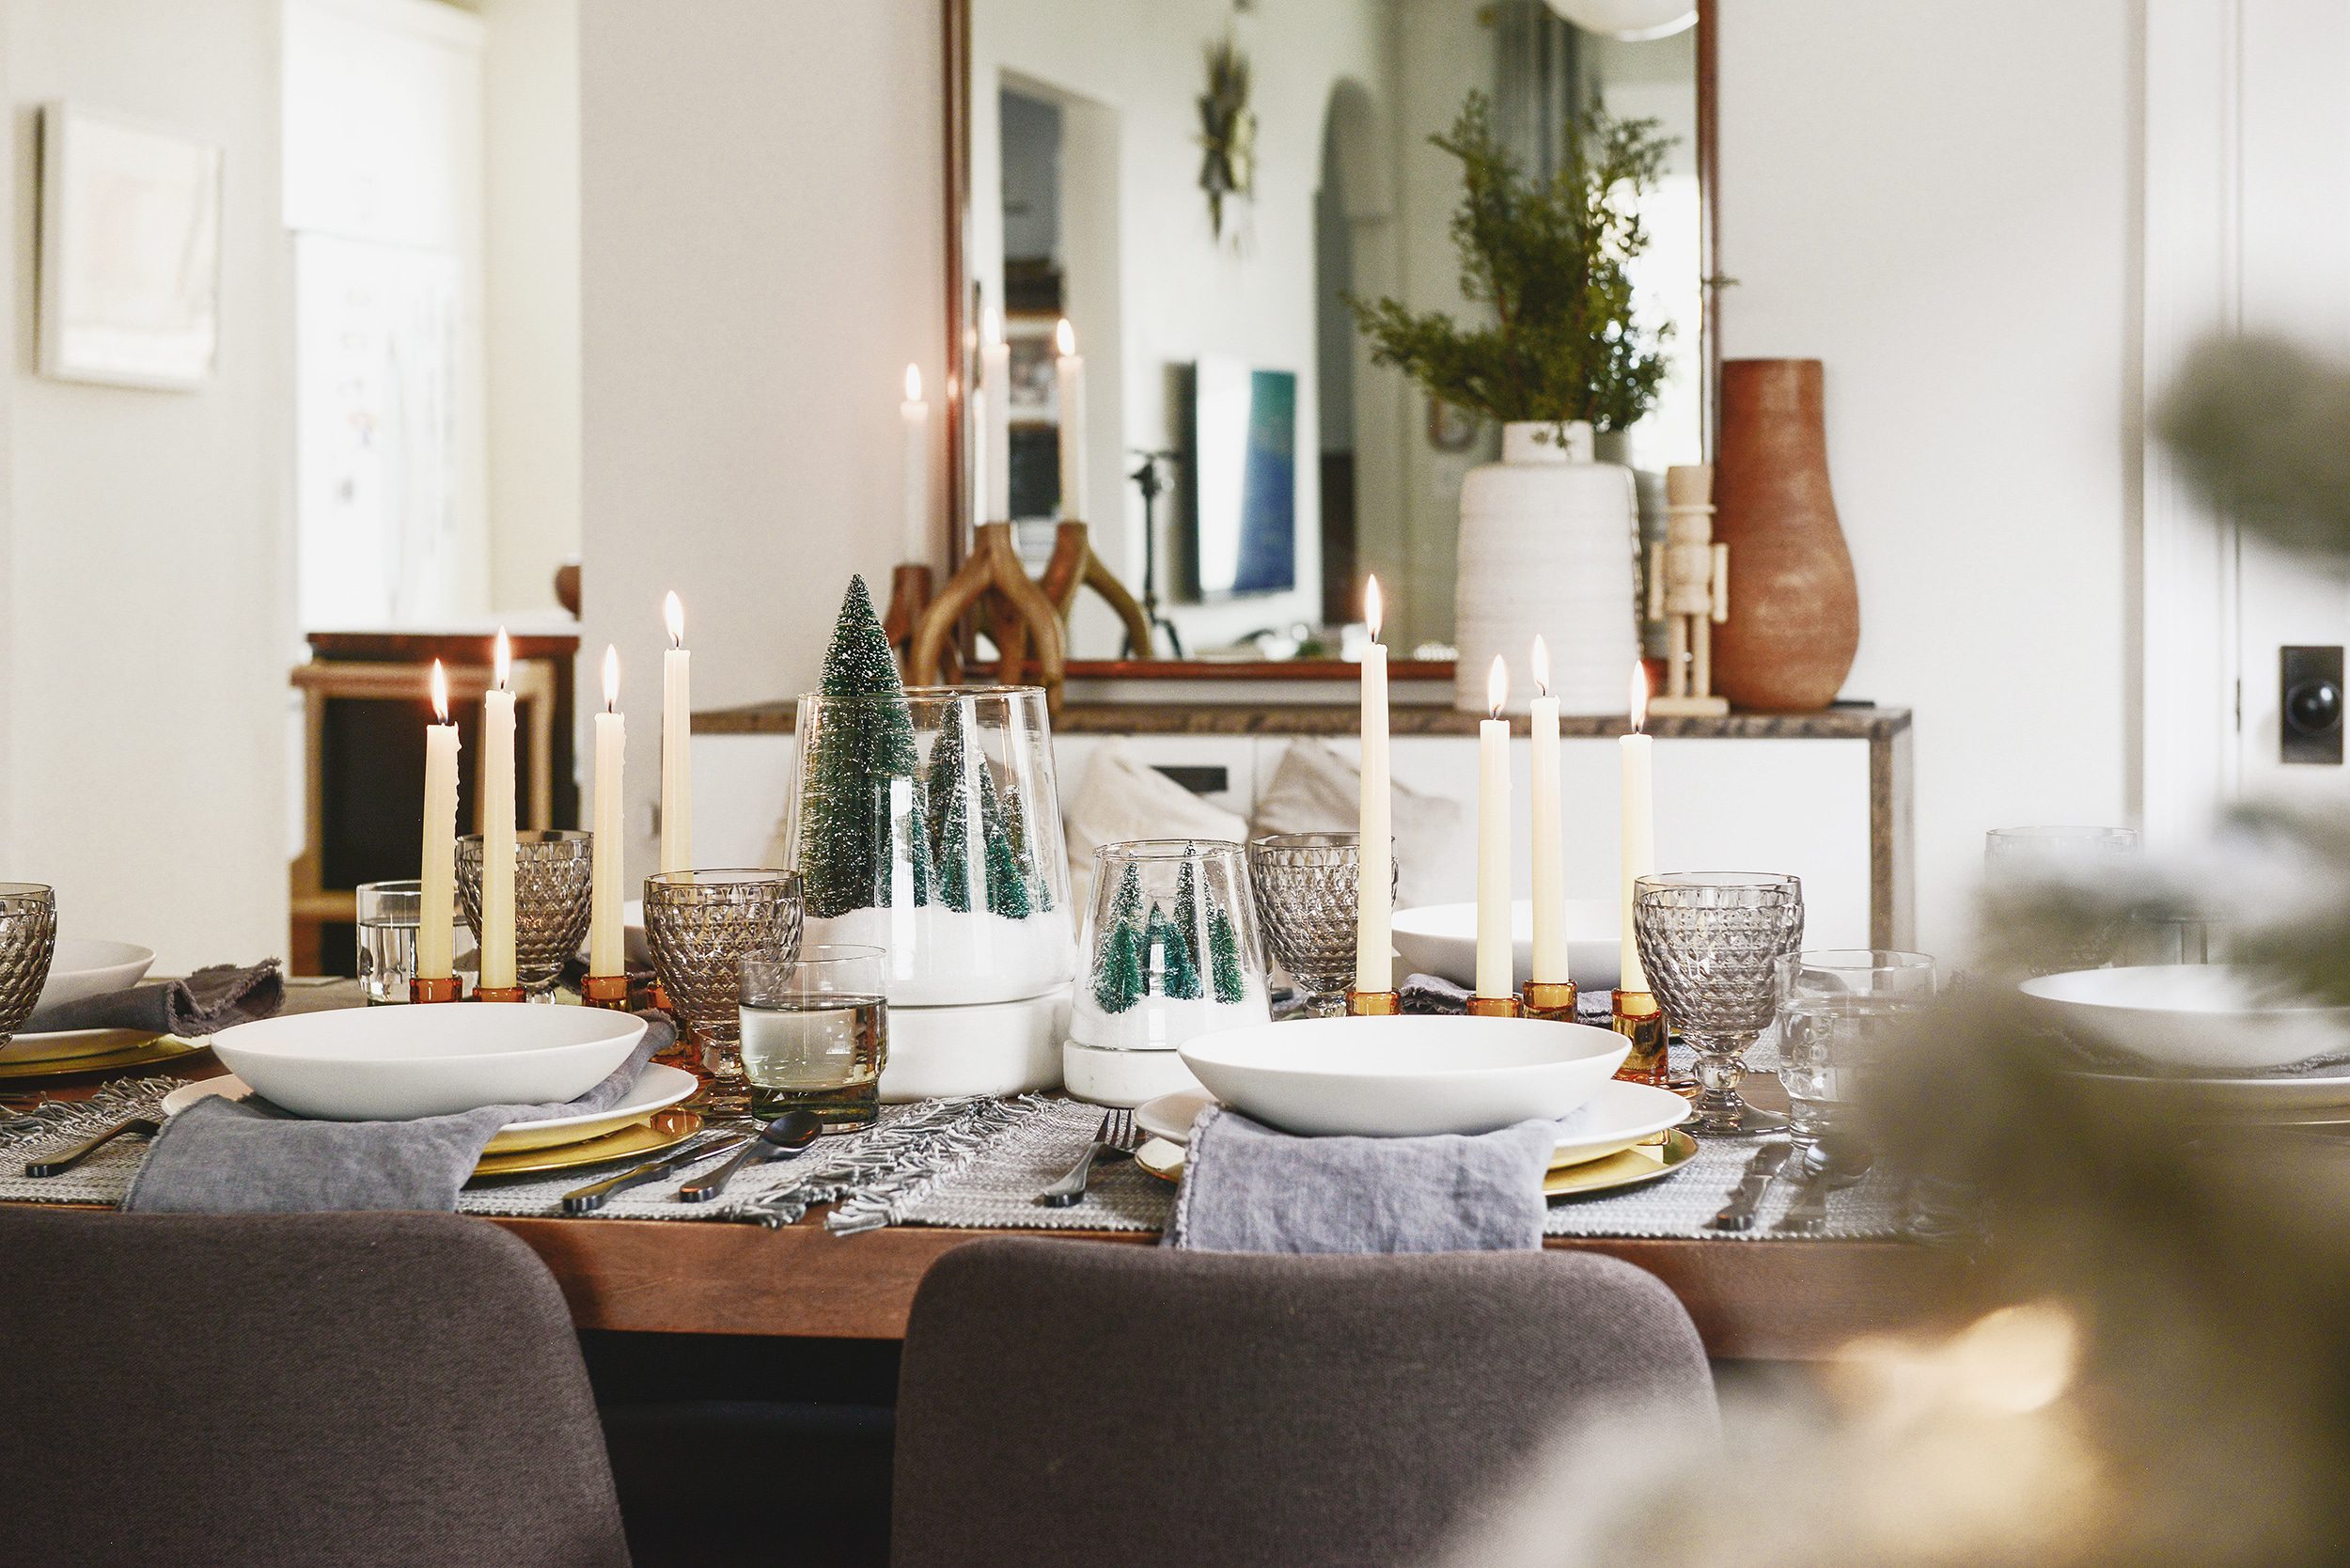 A holiday table setting in shades of grey, amber and white | This holiday season, consider simplifying your table setting with these 5 fresh styling tips! | via Yellow Brick Home